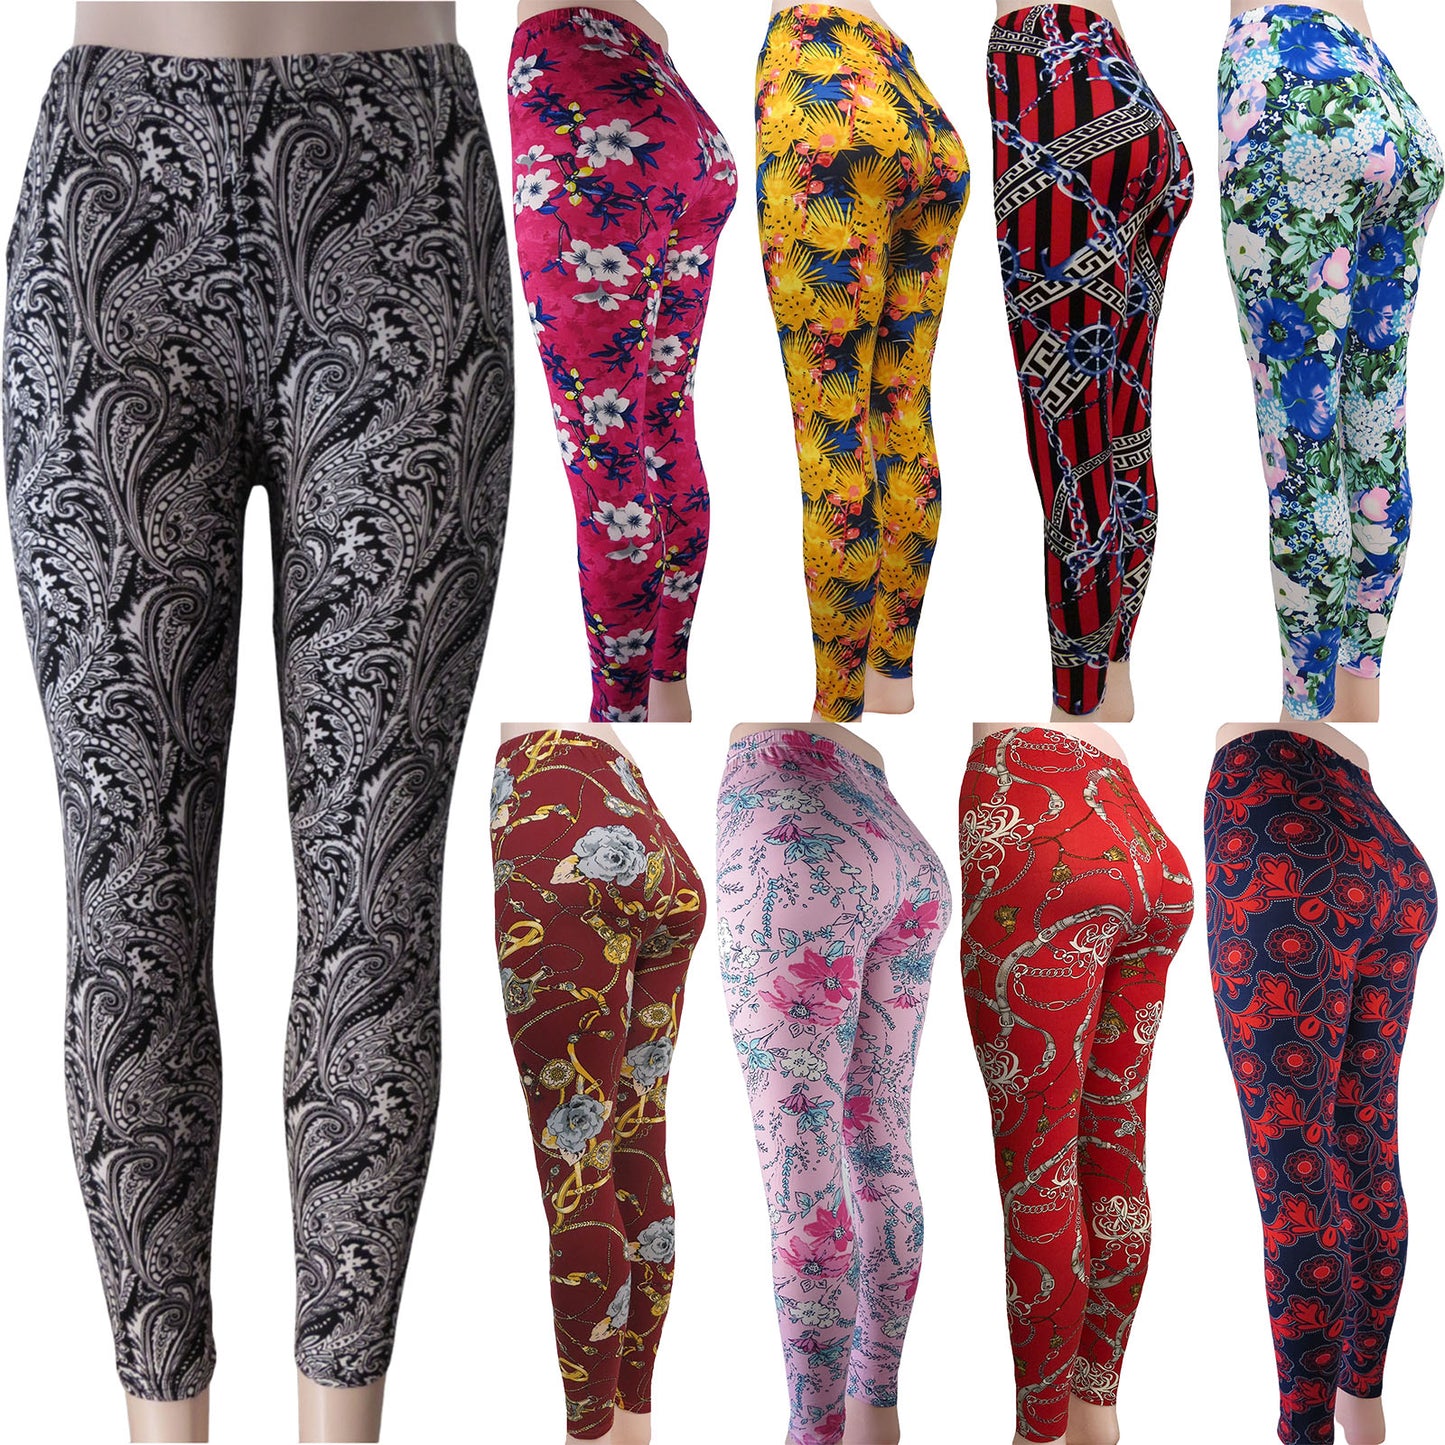 ITEM NUMBER: AP700-MIX1 (12 PIECE PACK WAS $3.00 - CLEARANCE SALE JUST $2.00) WHOLESALE PATTERNED LEGGINGS CLEARANCE